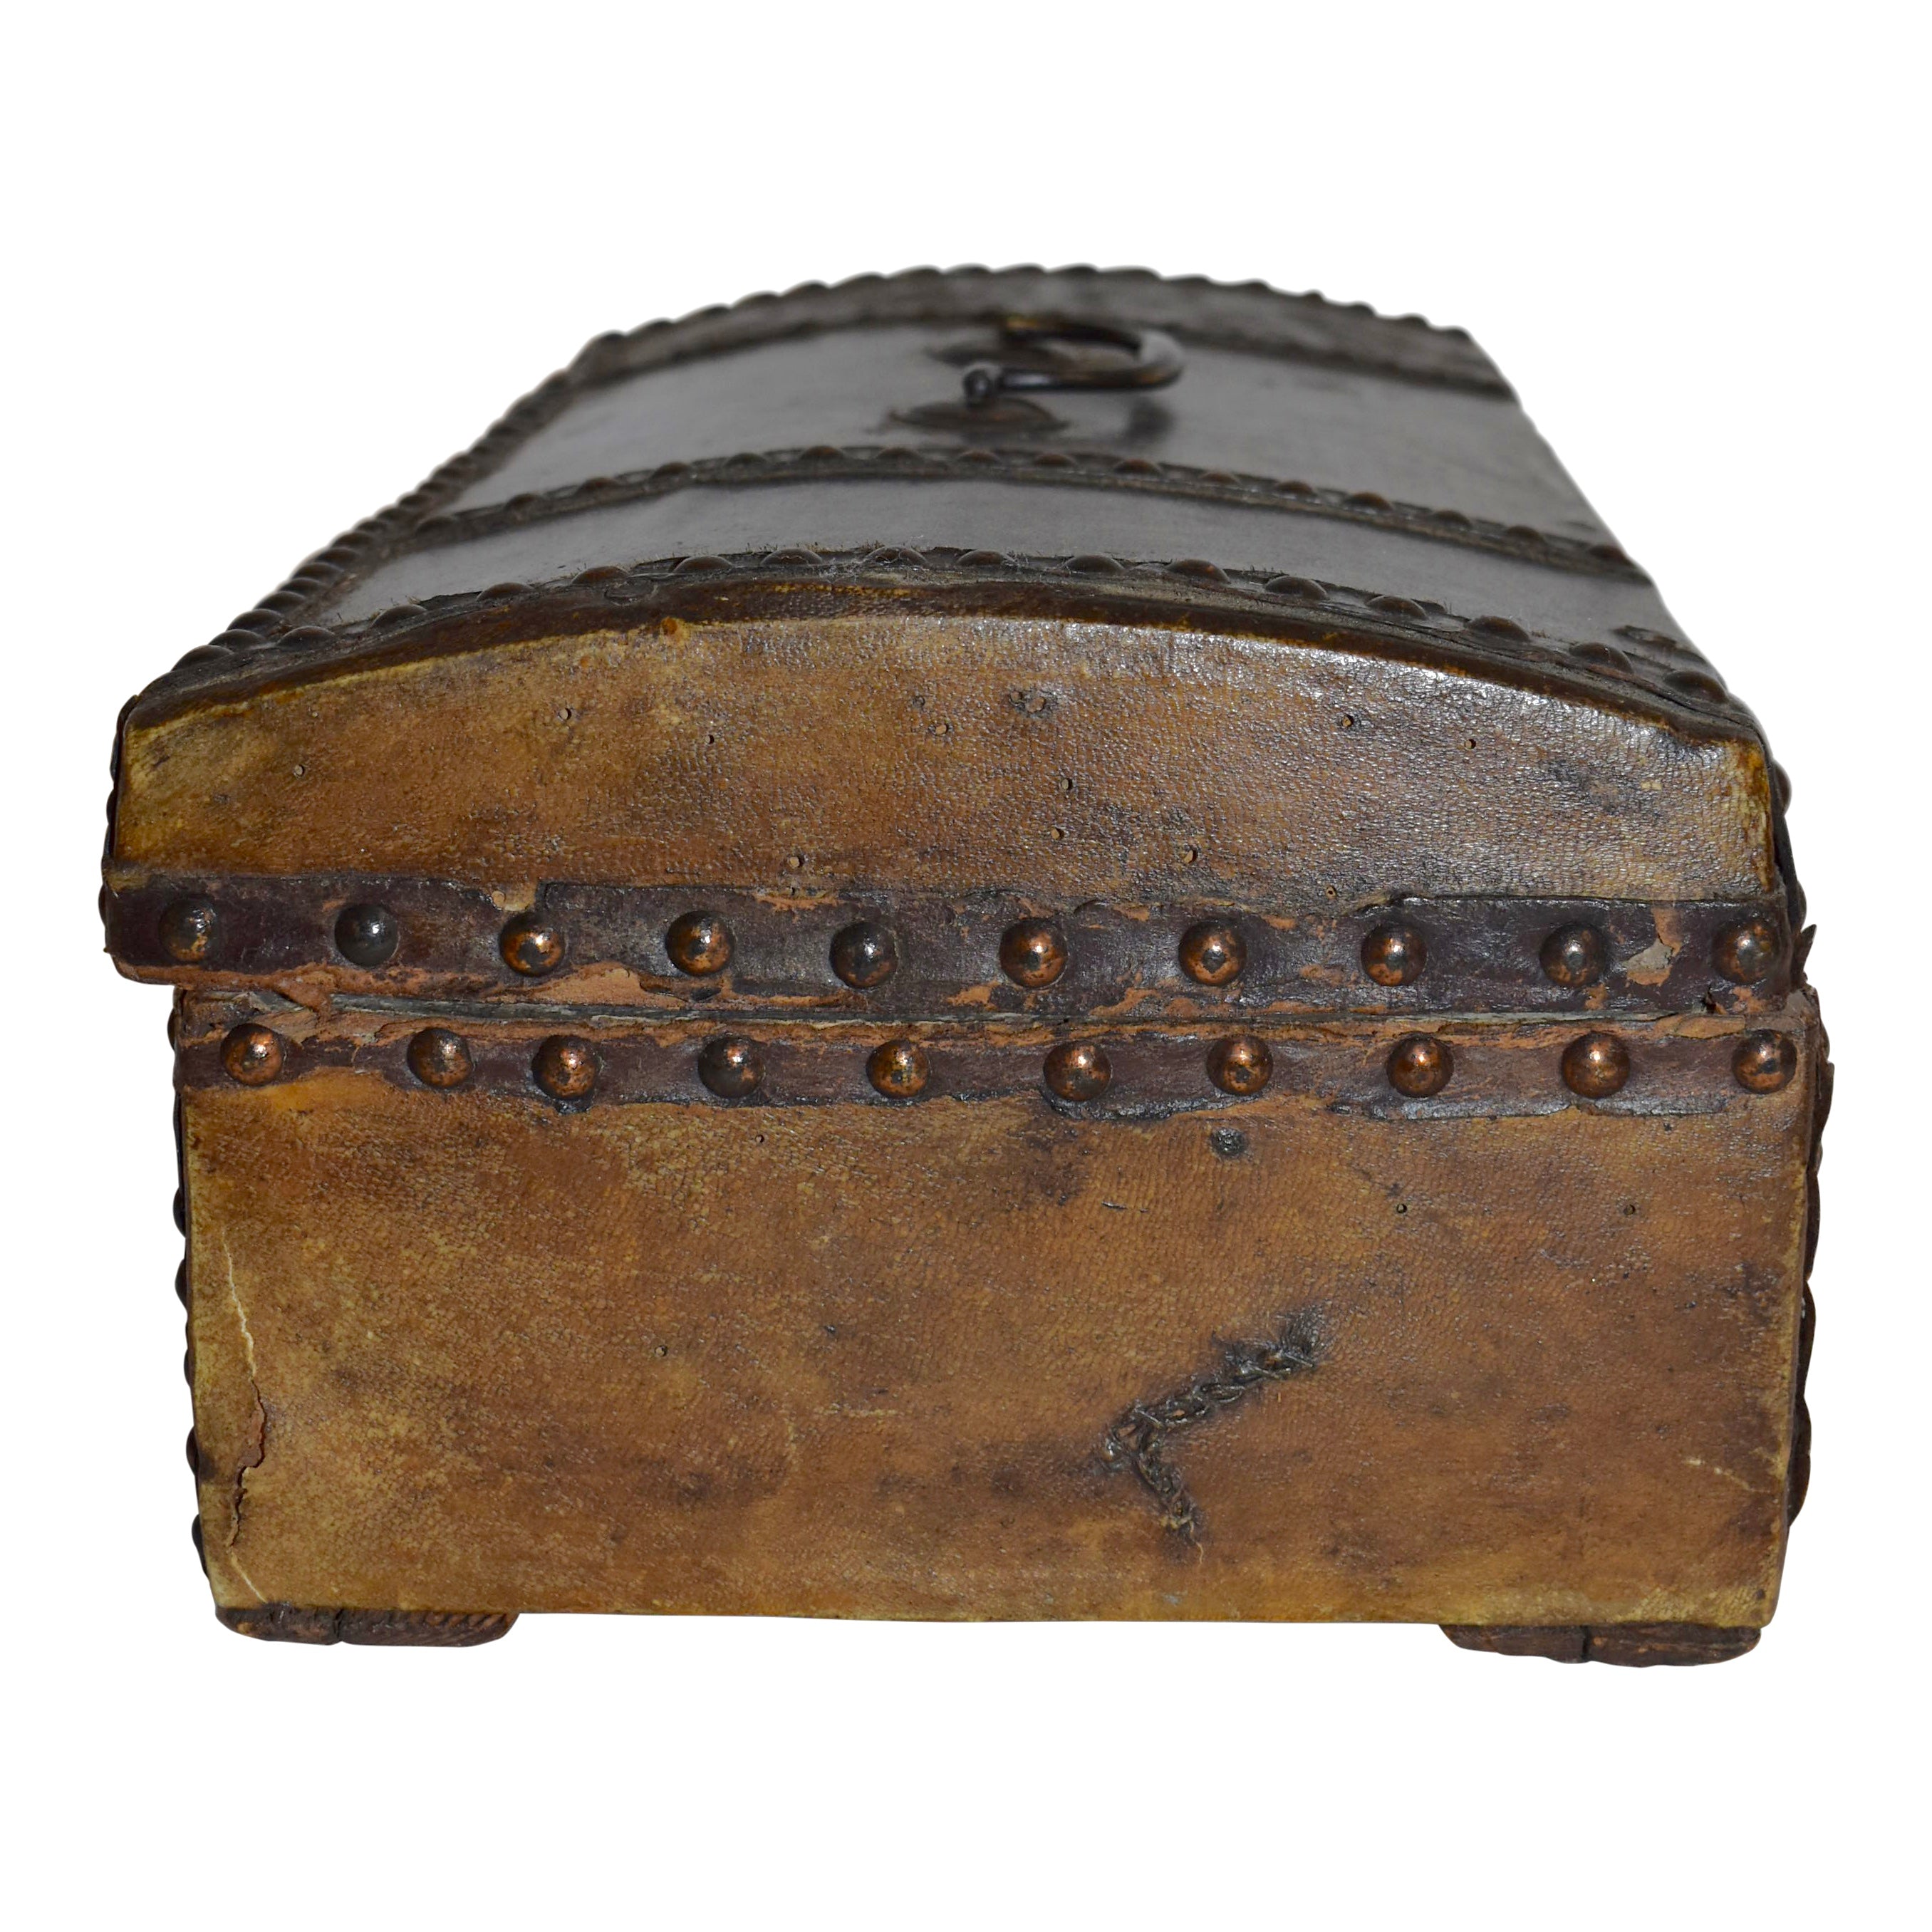 Small Leather Trunk